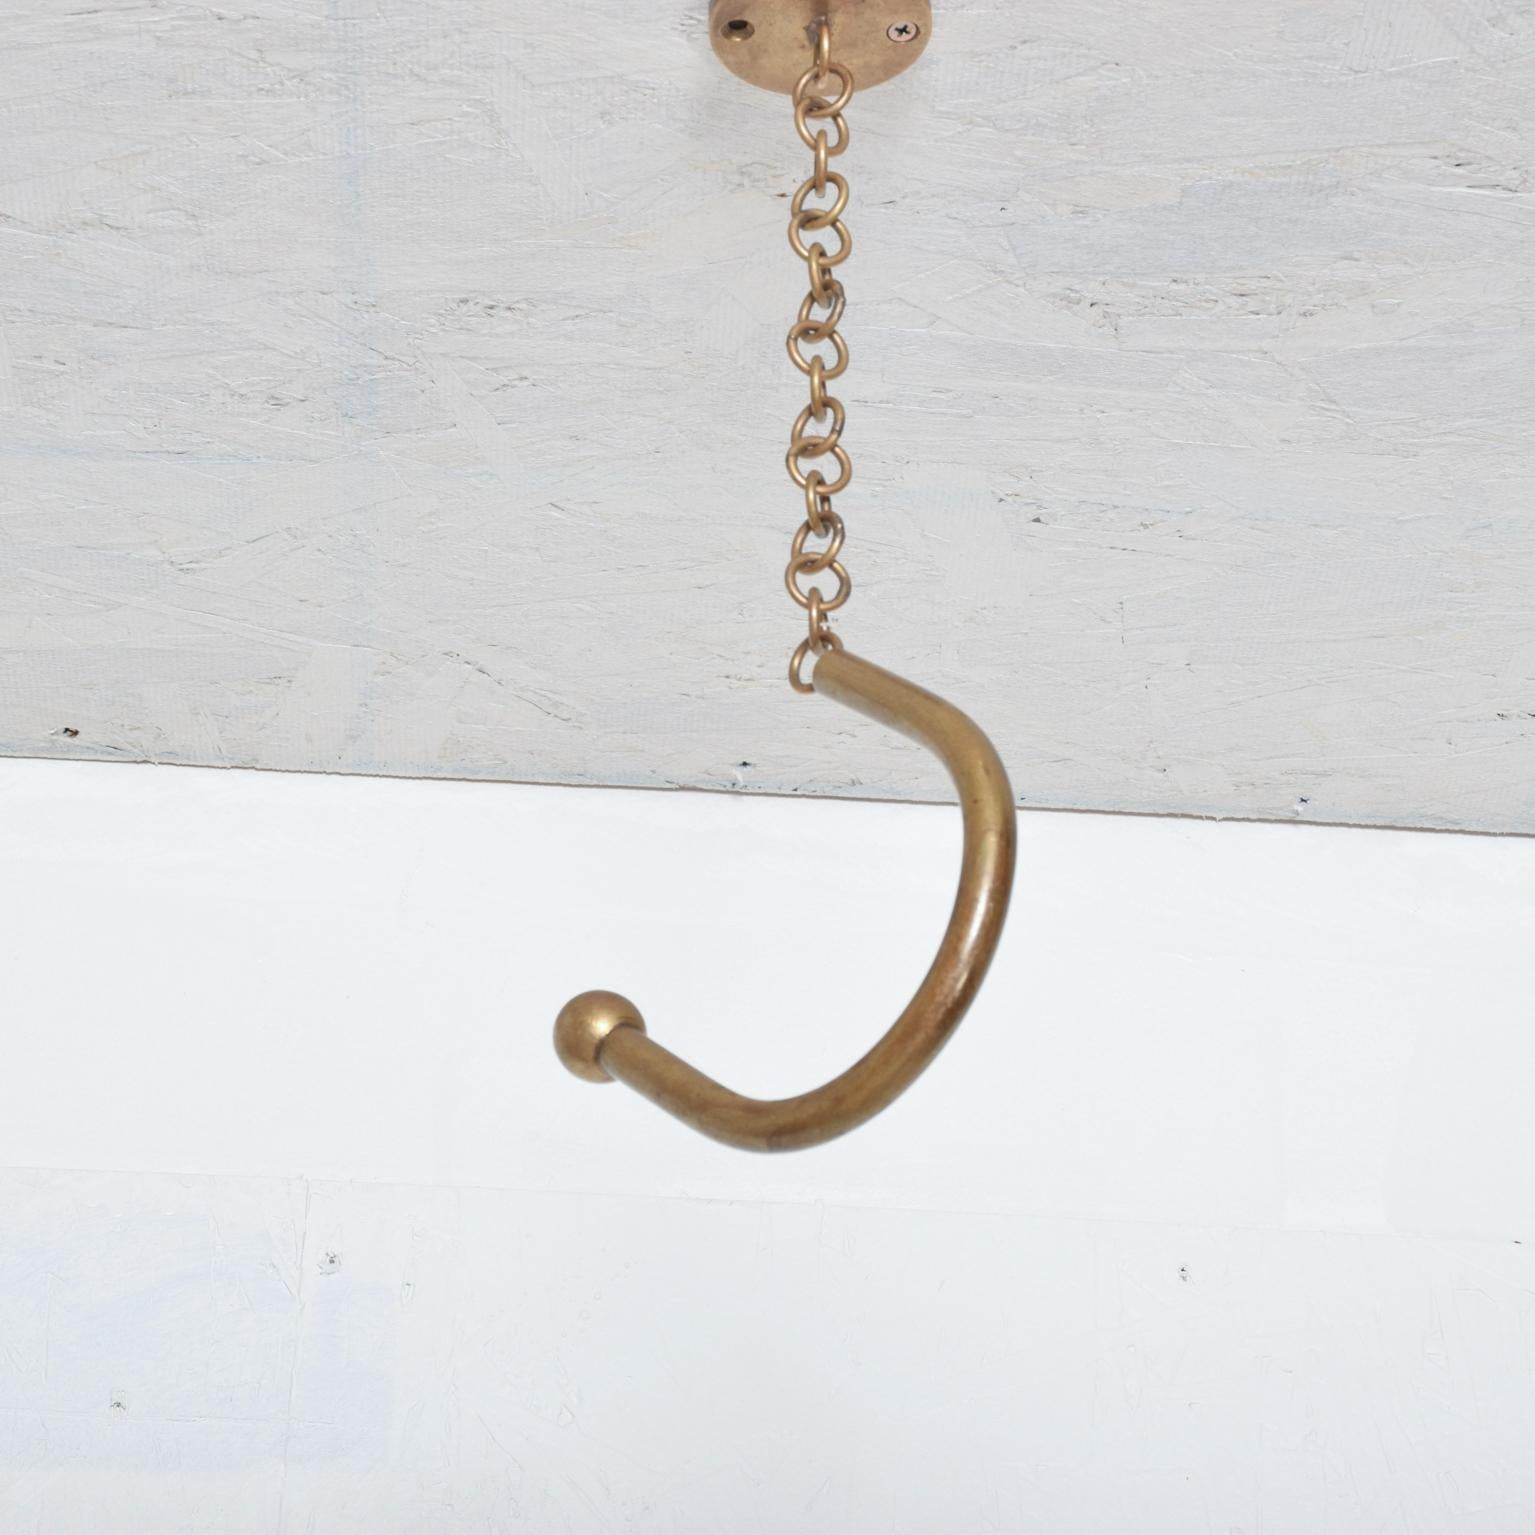 We are pleased to offer for your consideration a beautiful and unusual coat hanger in bronze. Chain and canopy are a single unit. Dimensions: 14 1/2